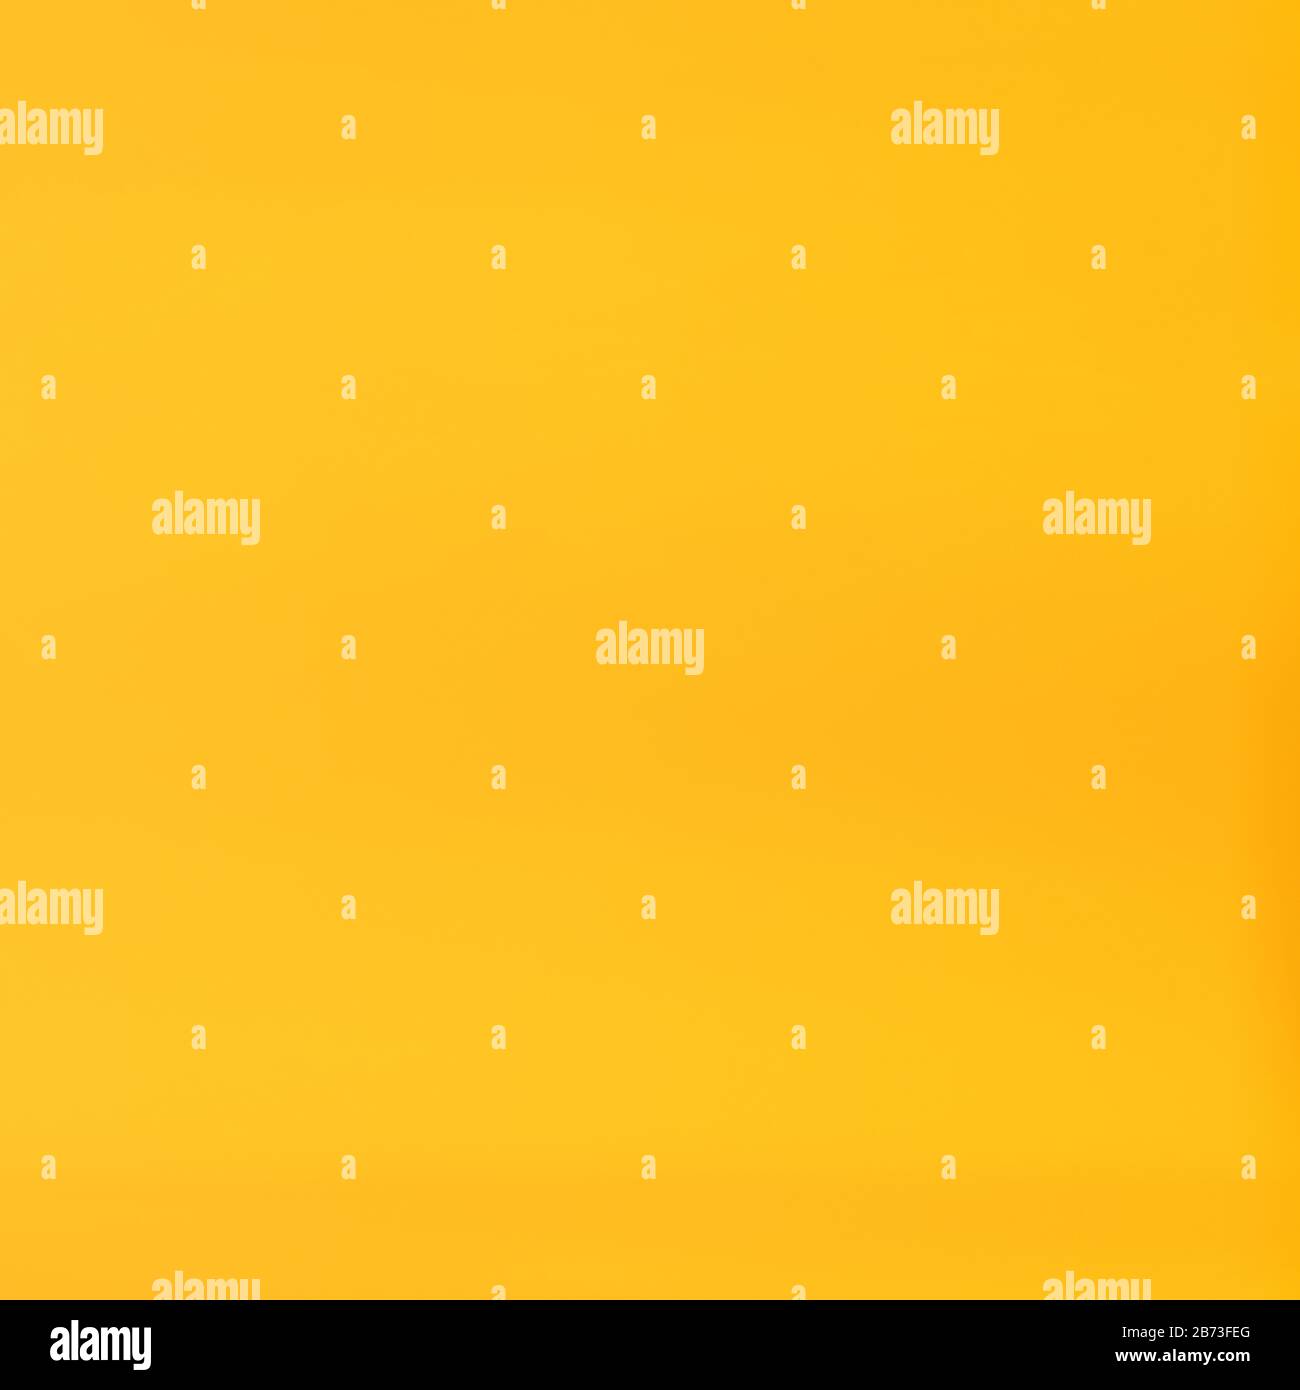 Smooth simple gradient yellow abstract background Stock Photo